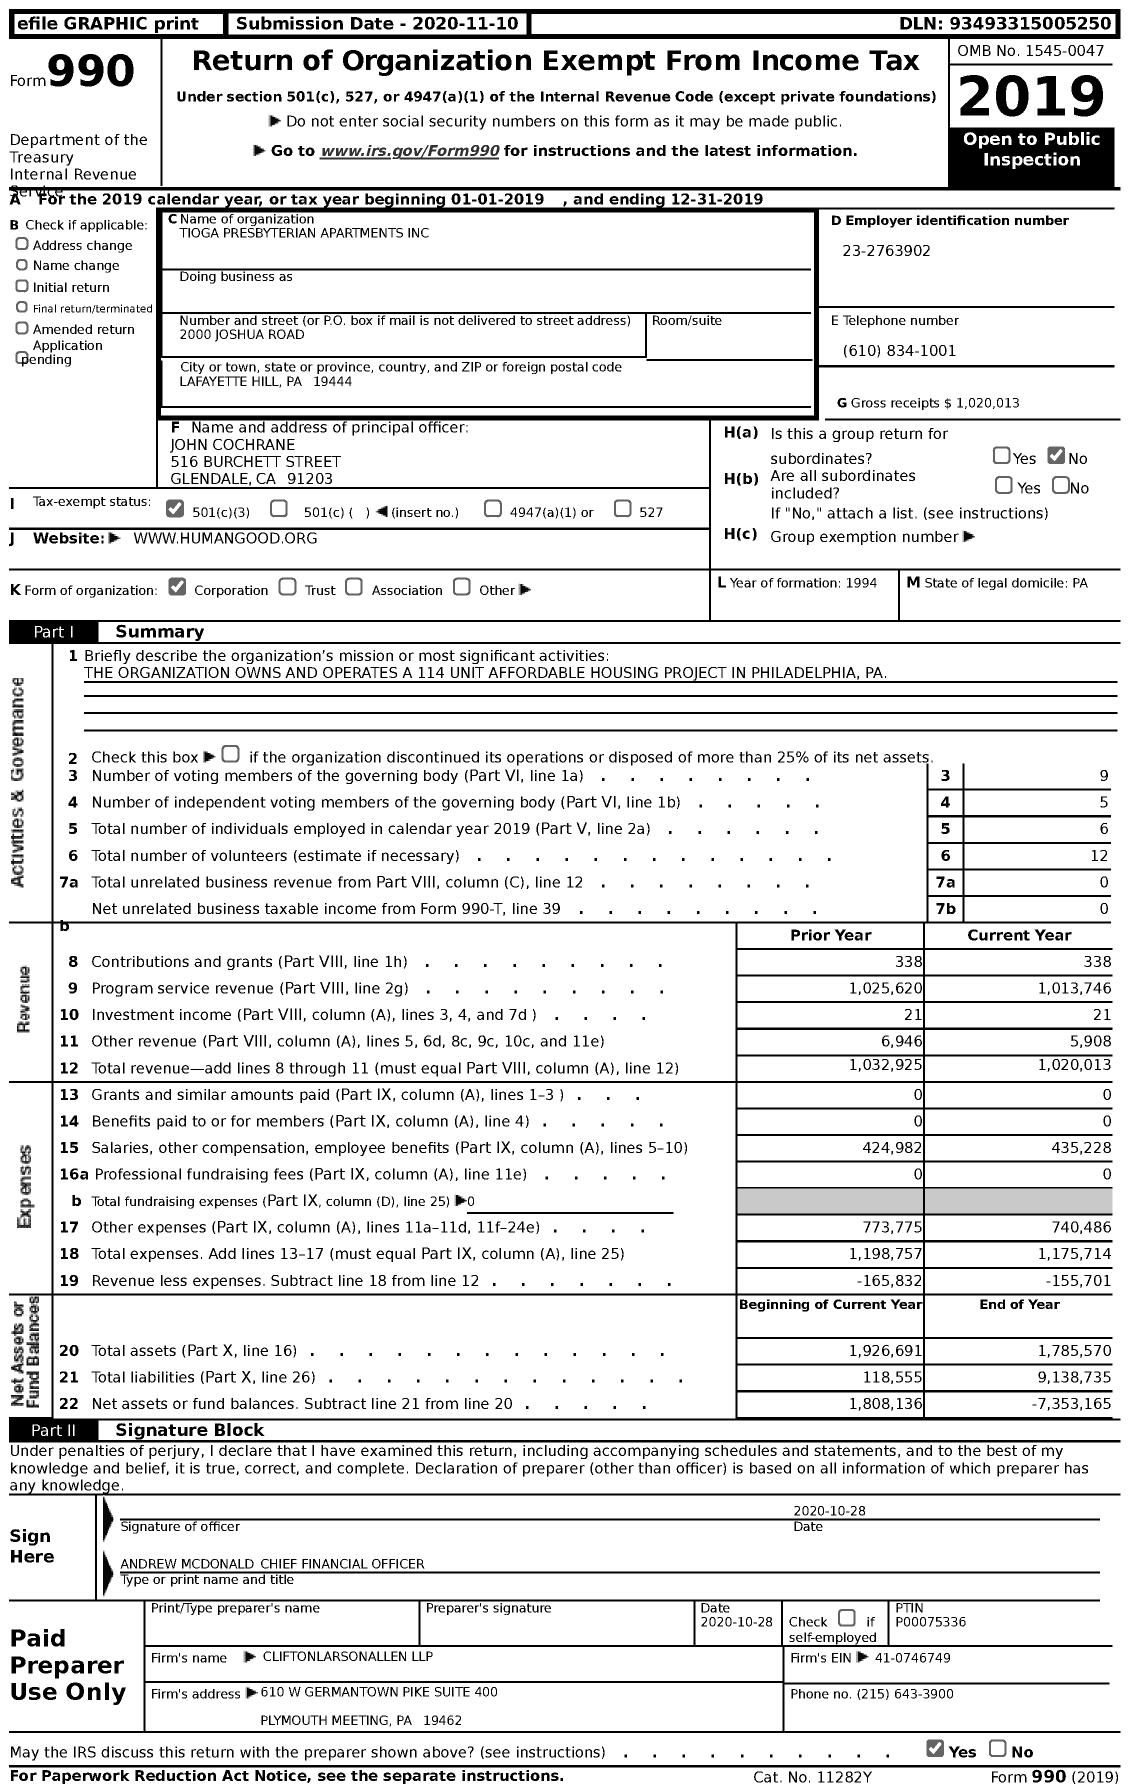 Image of first page of 2019 Form 990 for Tioga Presbyterian Apartments